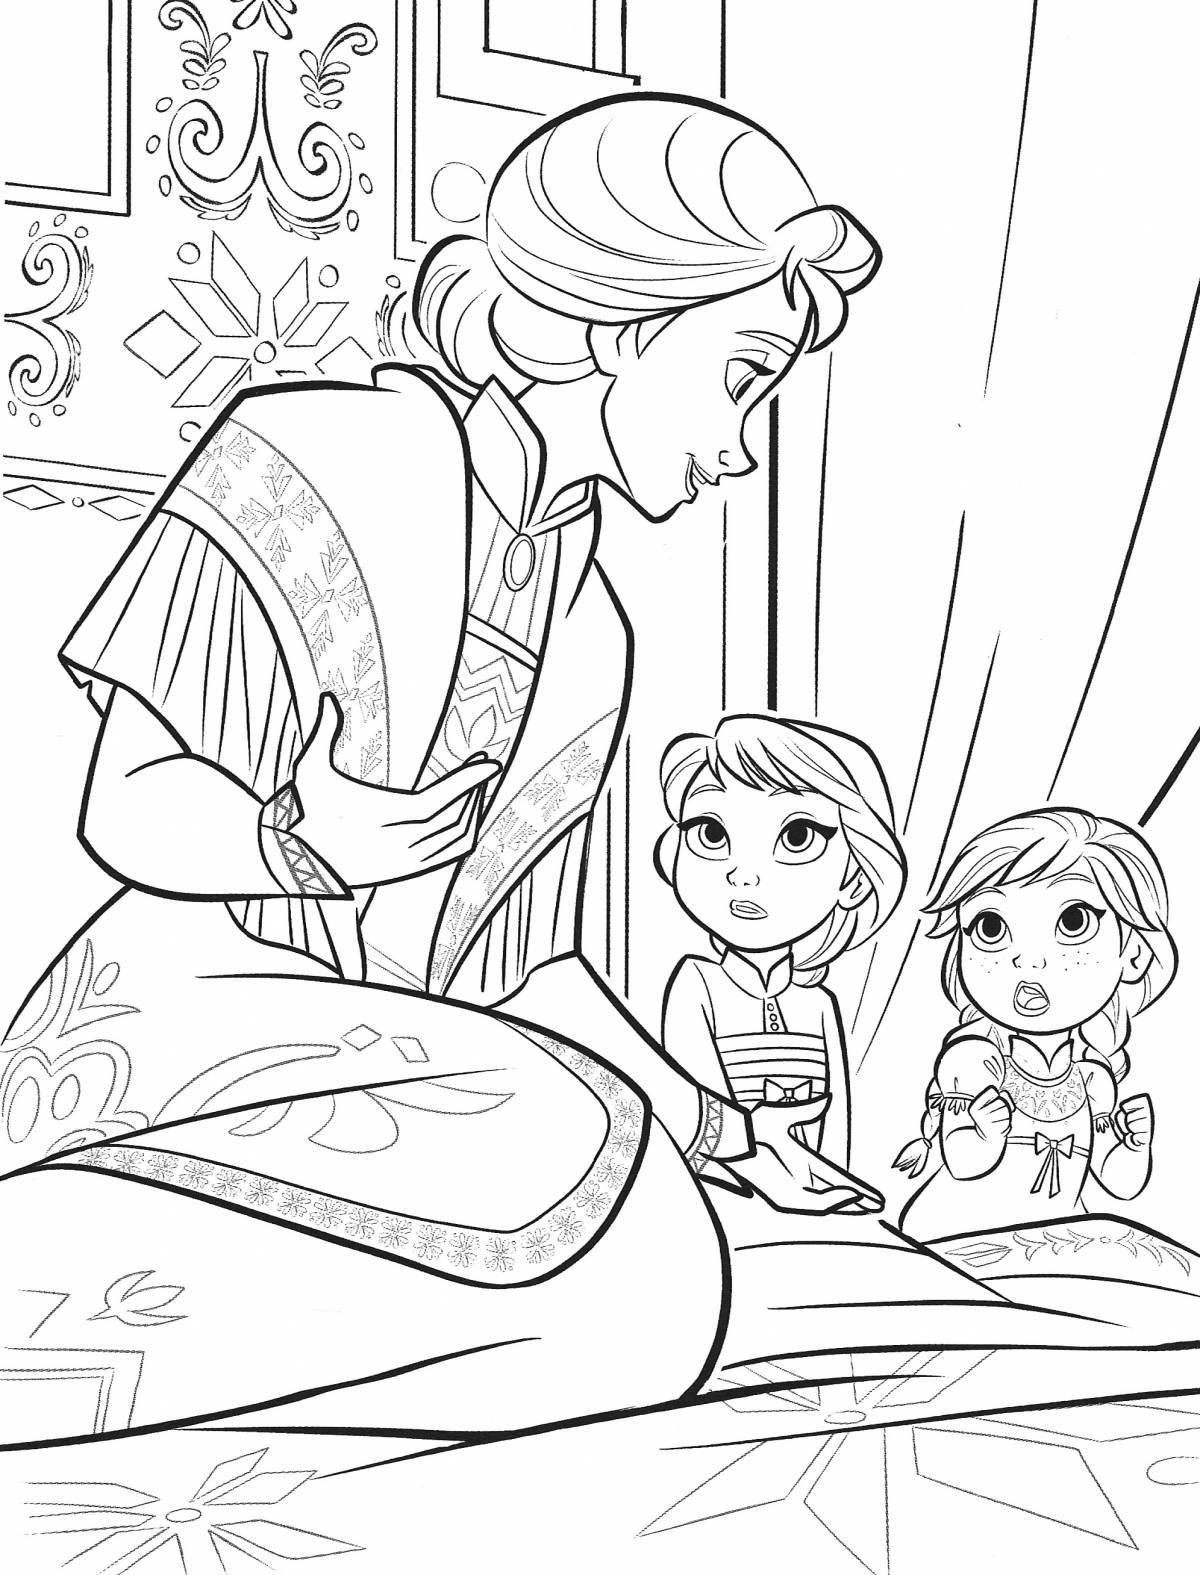 Elsa and anna frozen awesome coloring book